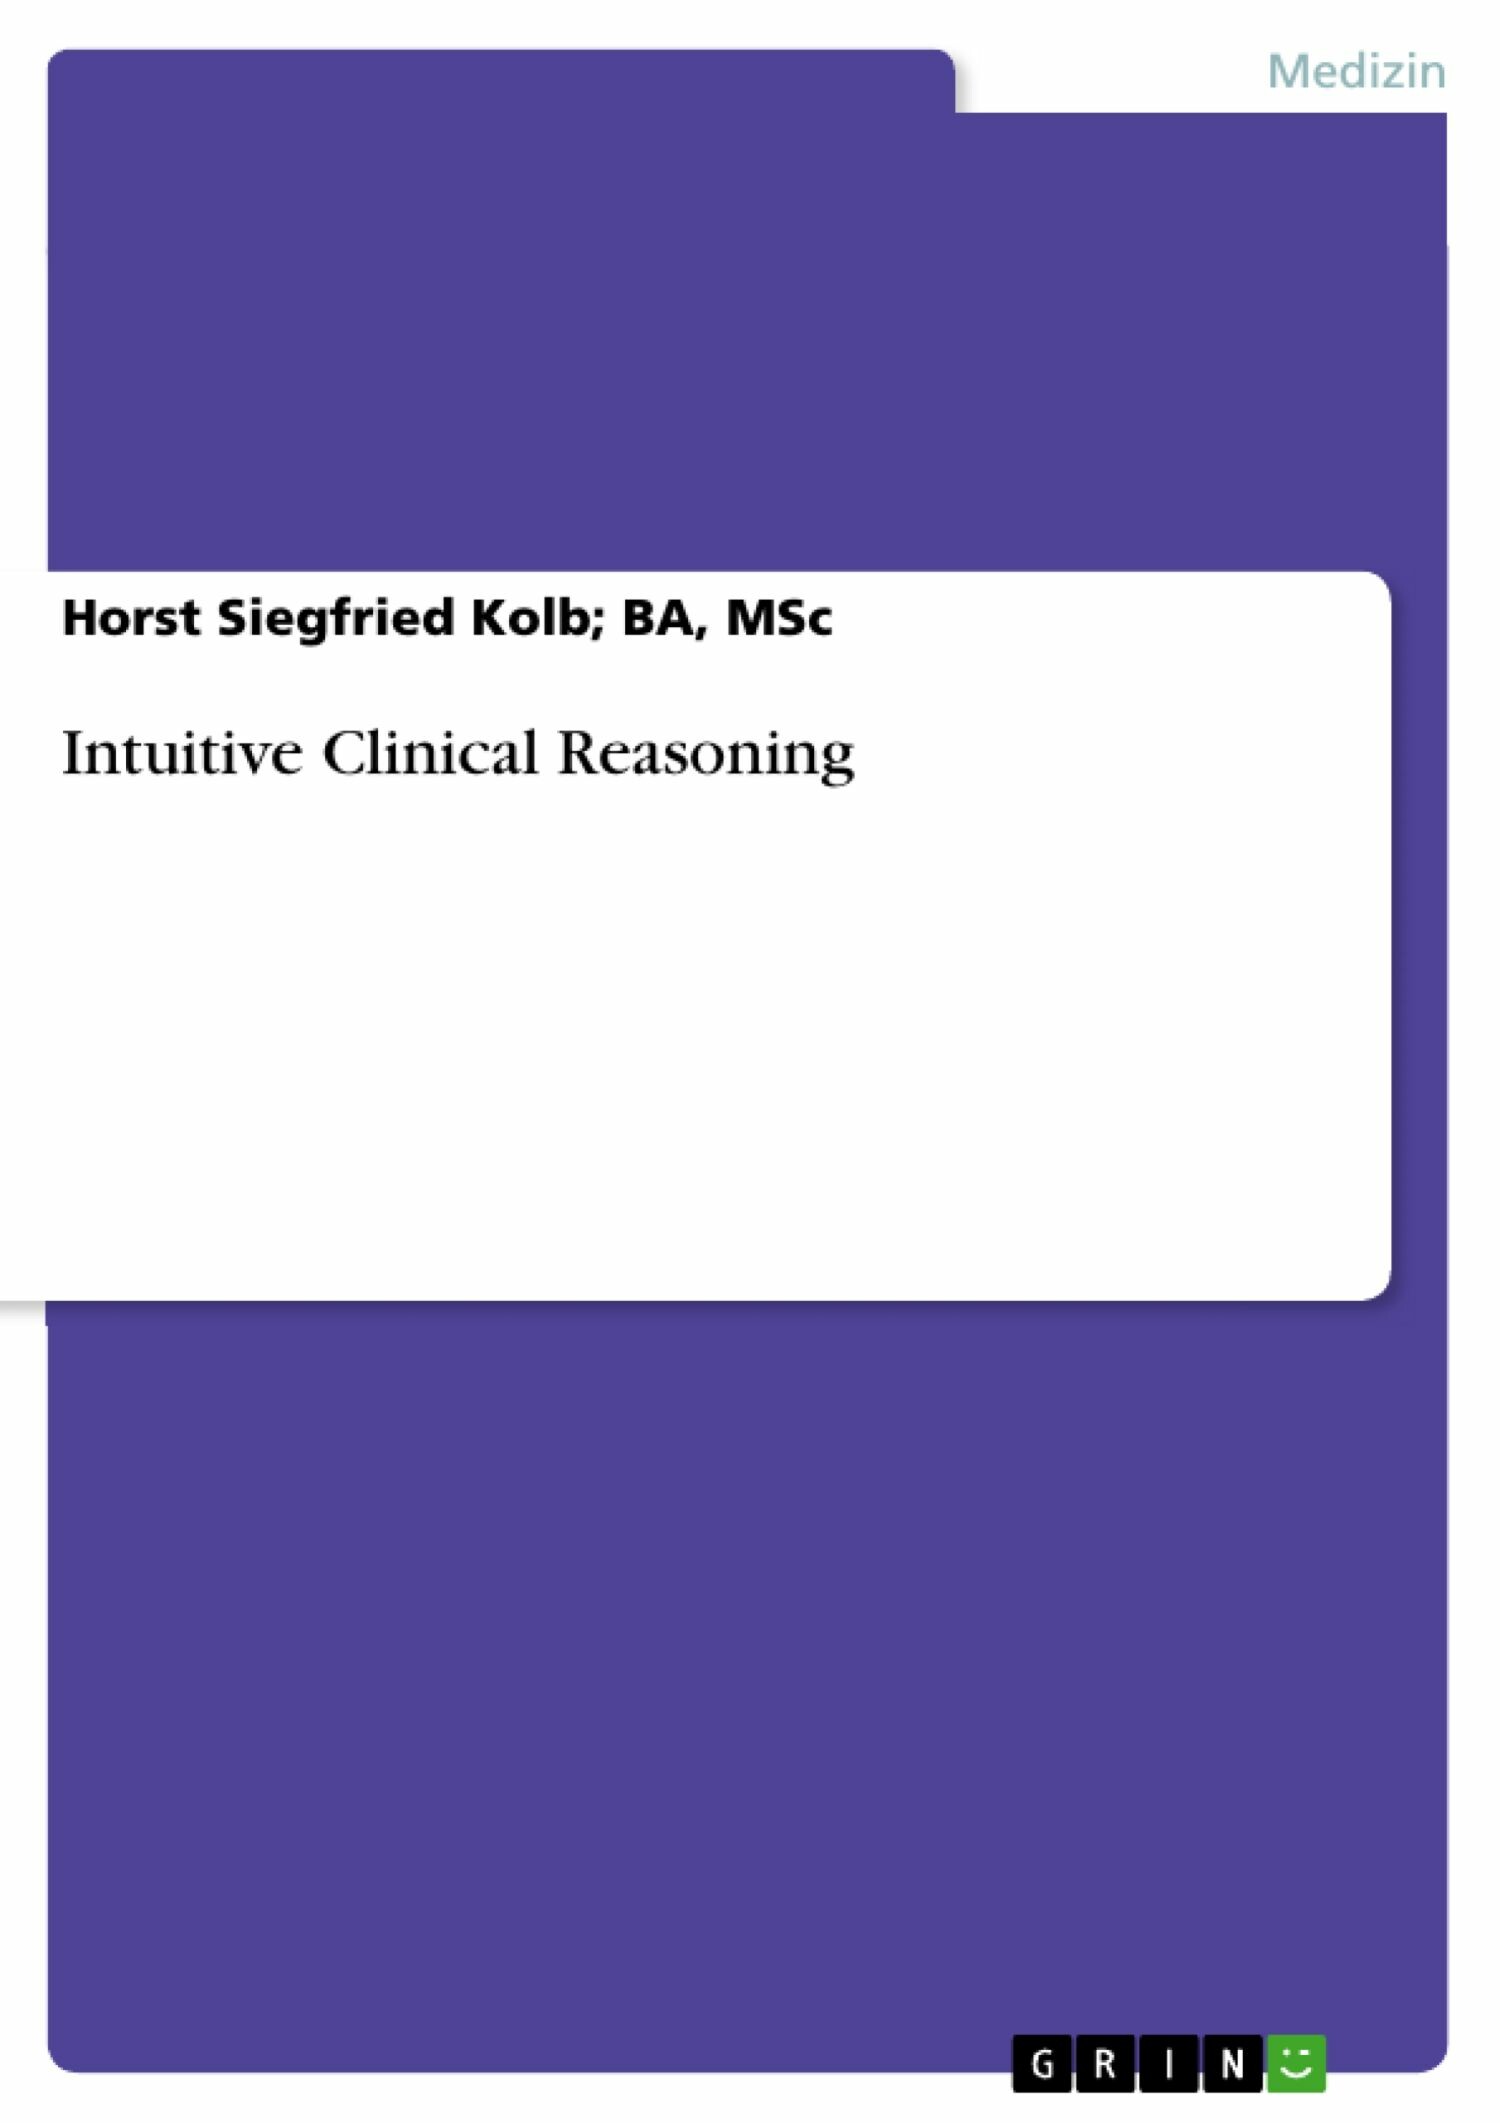 Intuitive Clinical Reasoning